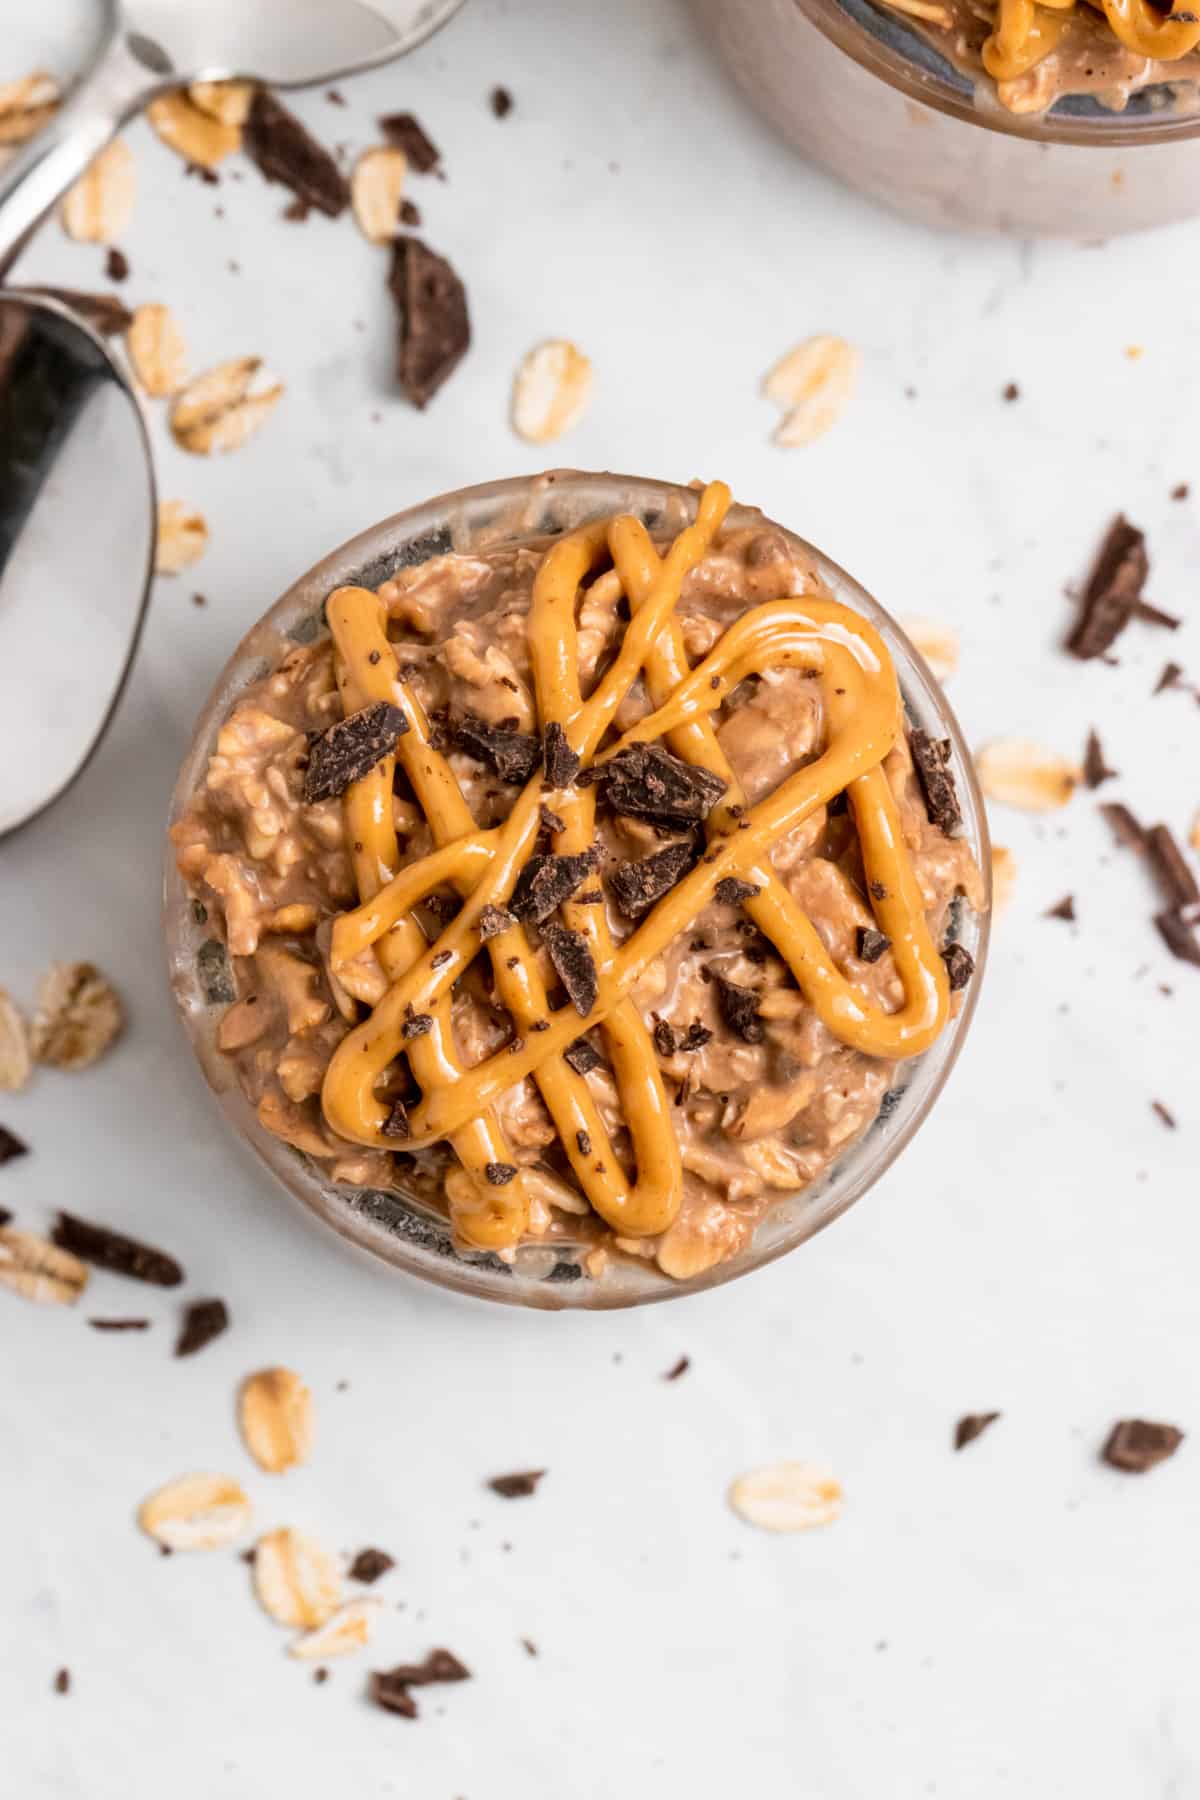 Overhead view of oatmeal with peanut butter drizzle.